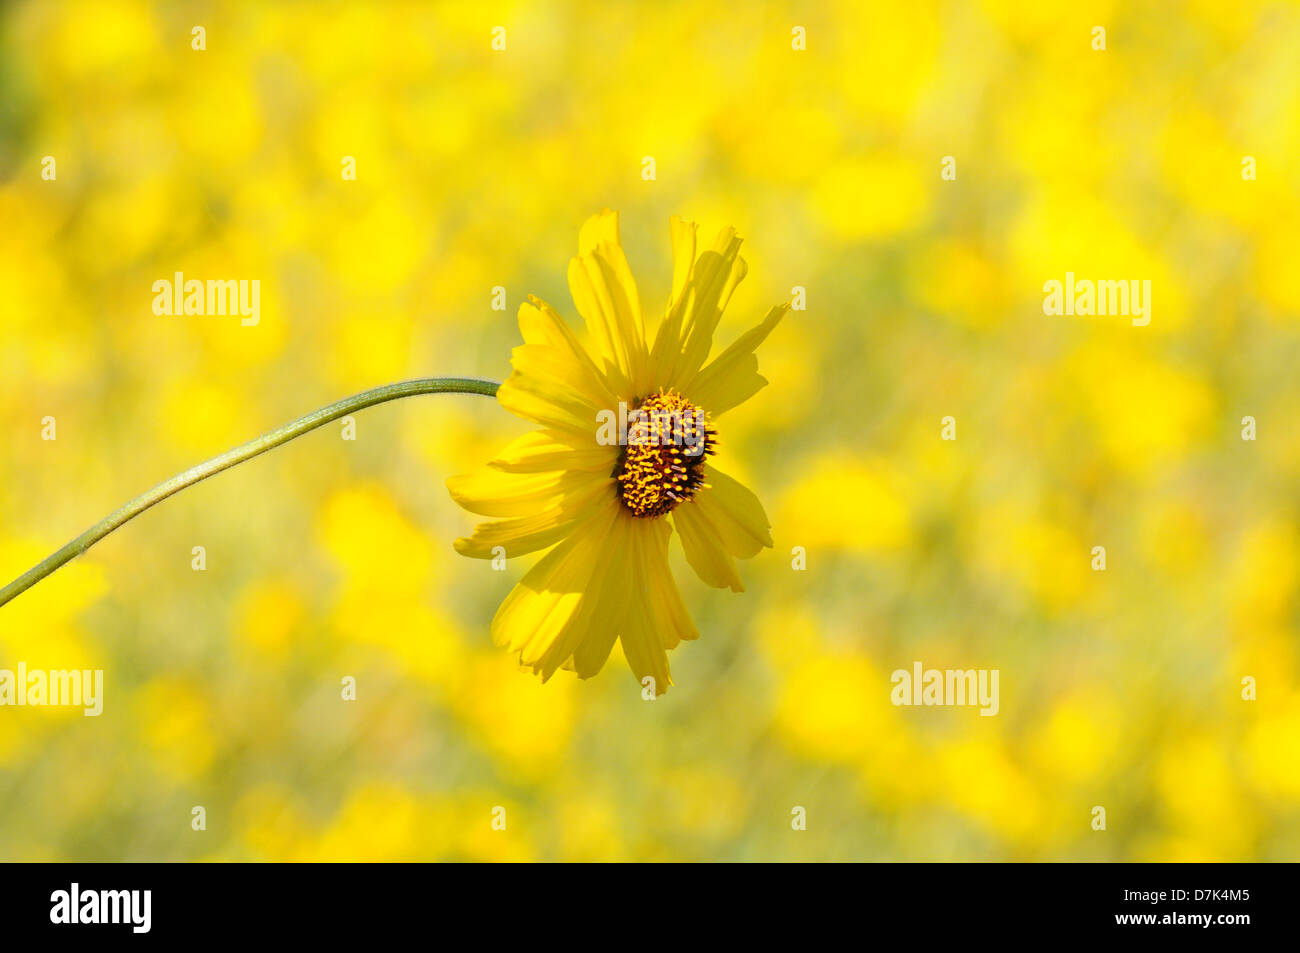 Closeup of a yellow daisy with an out of focus background. Horizontal format. Stock Photo